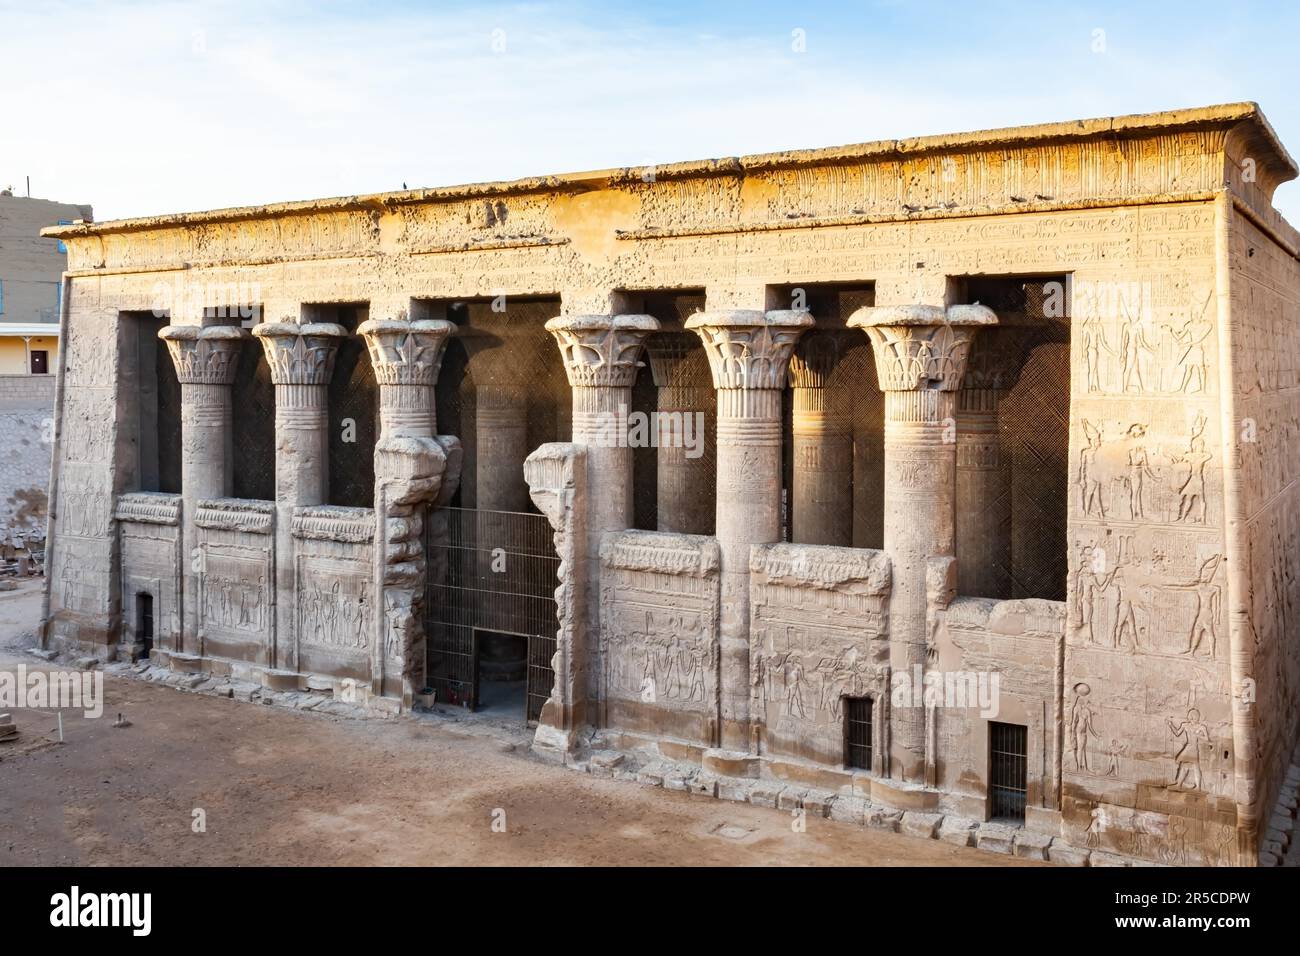 View of The Temple of Khnum, The Ram headed egyptian god, in Esna, Upper Egypt Stock Photo